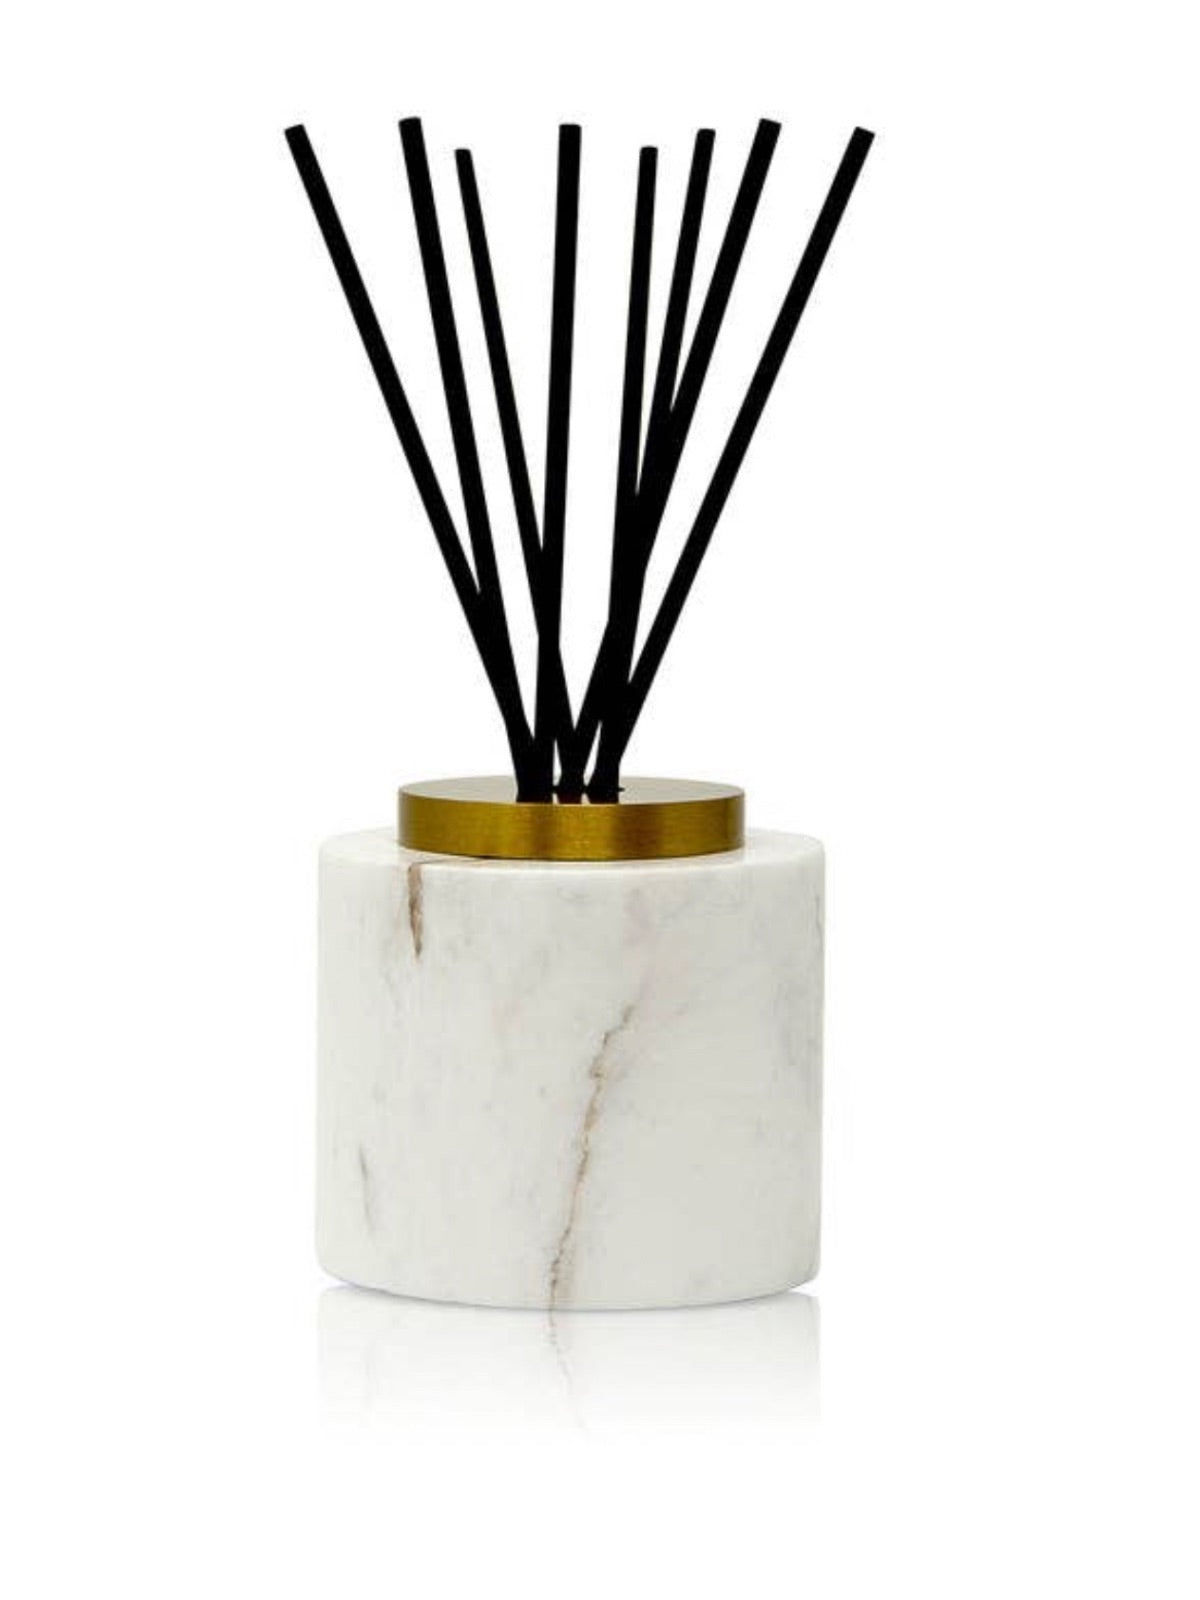 120ml Reed Diffuser with Gold Rim with Luxury Zen Tea Scent sold by KYA Home Decor.